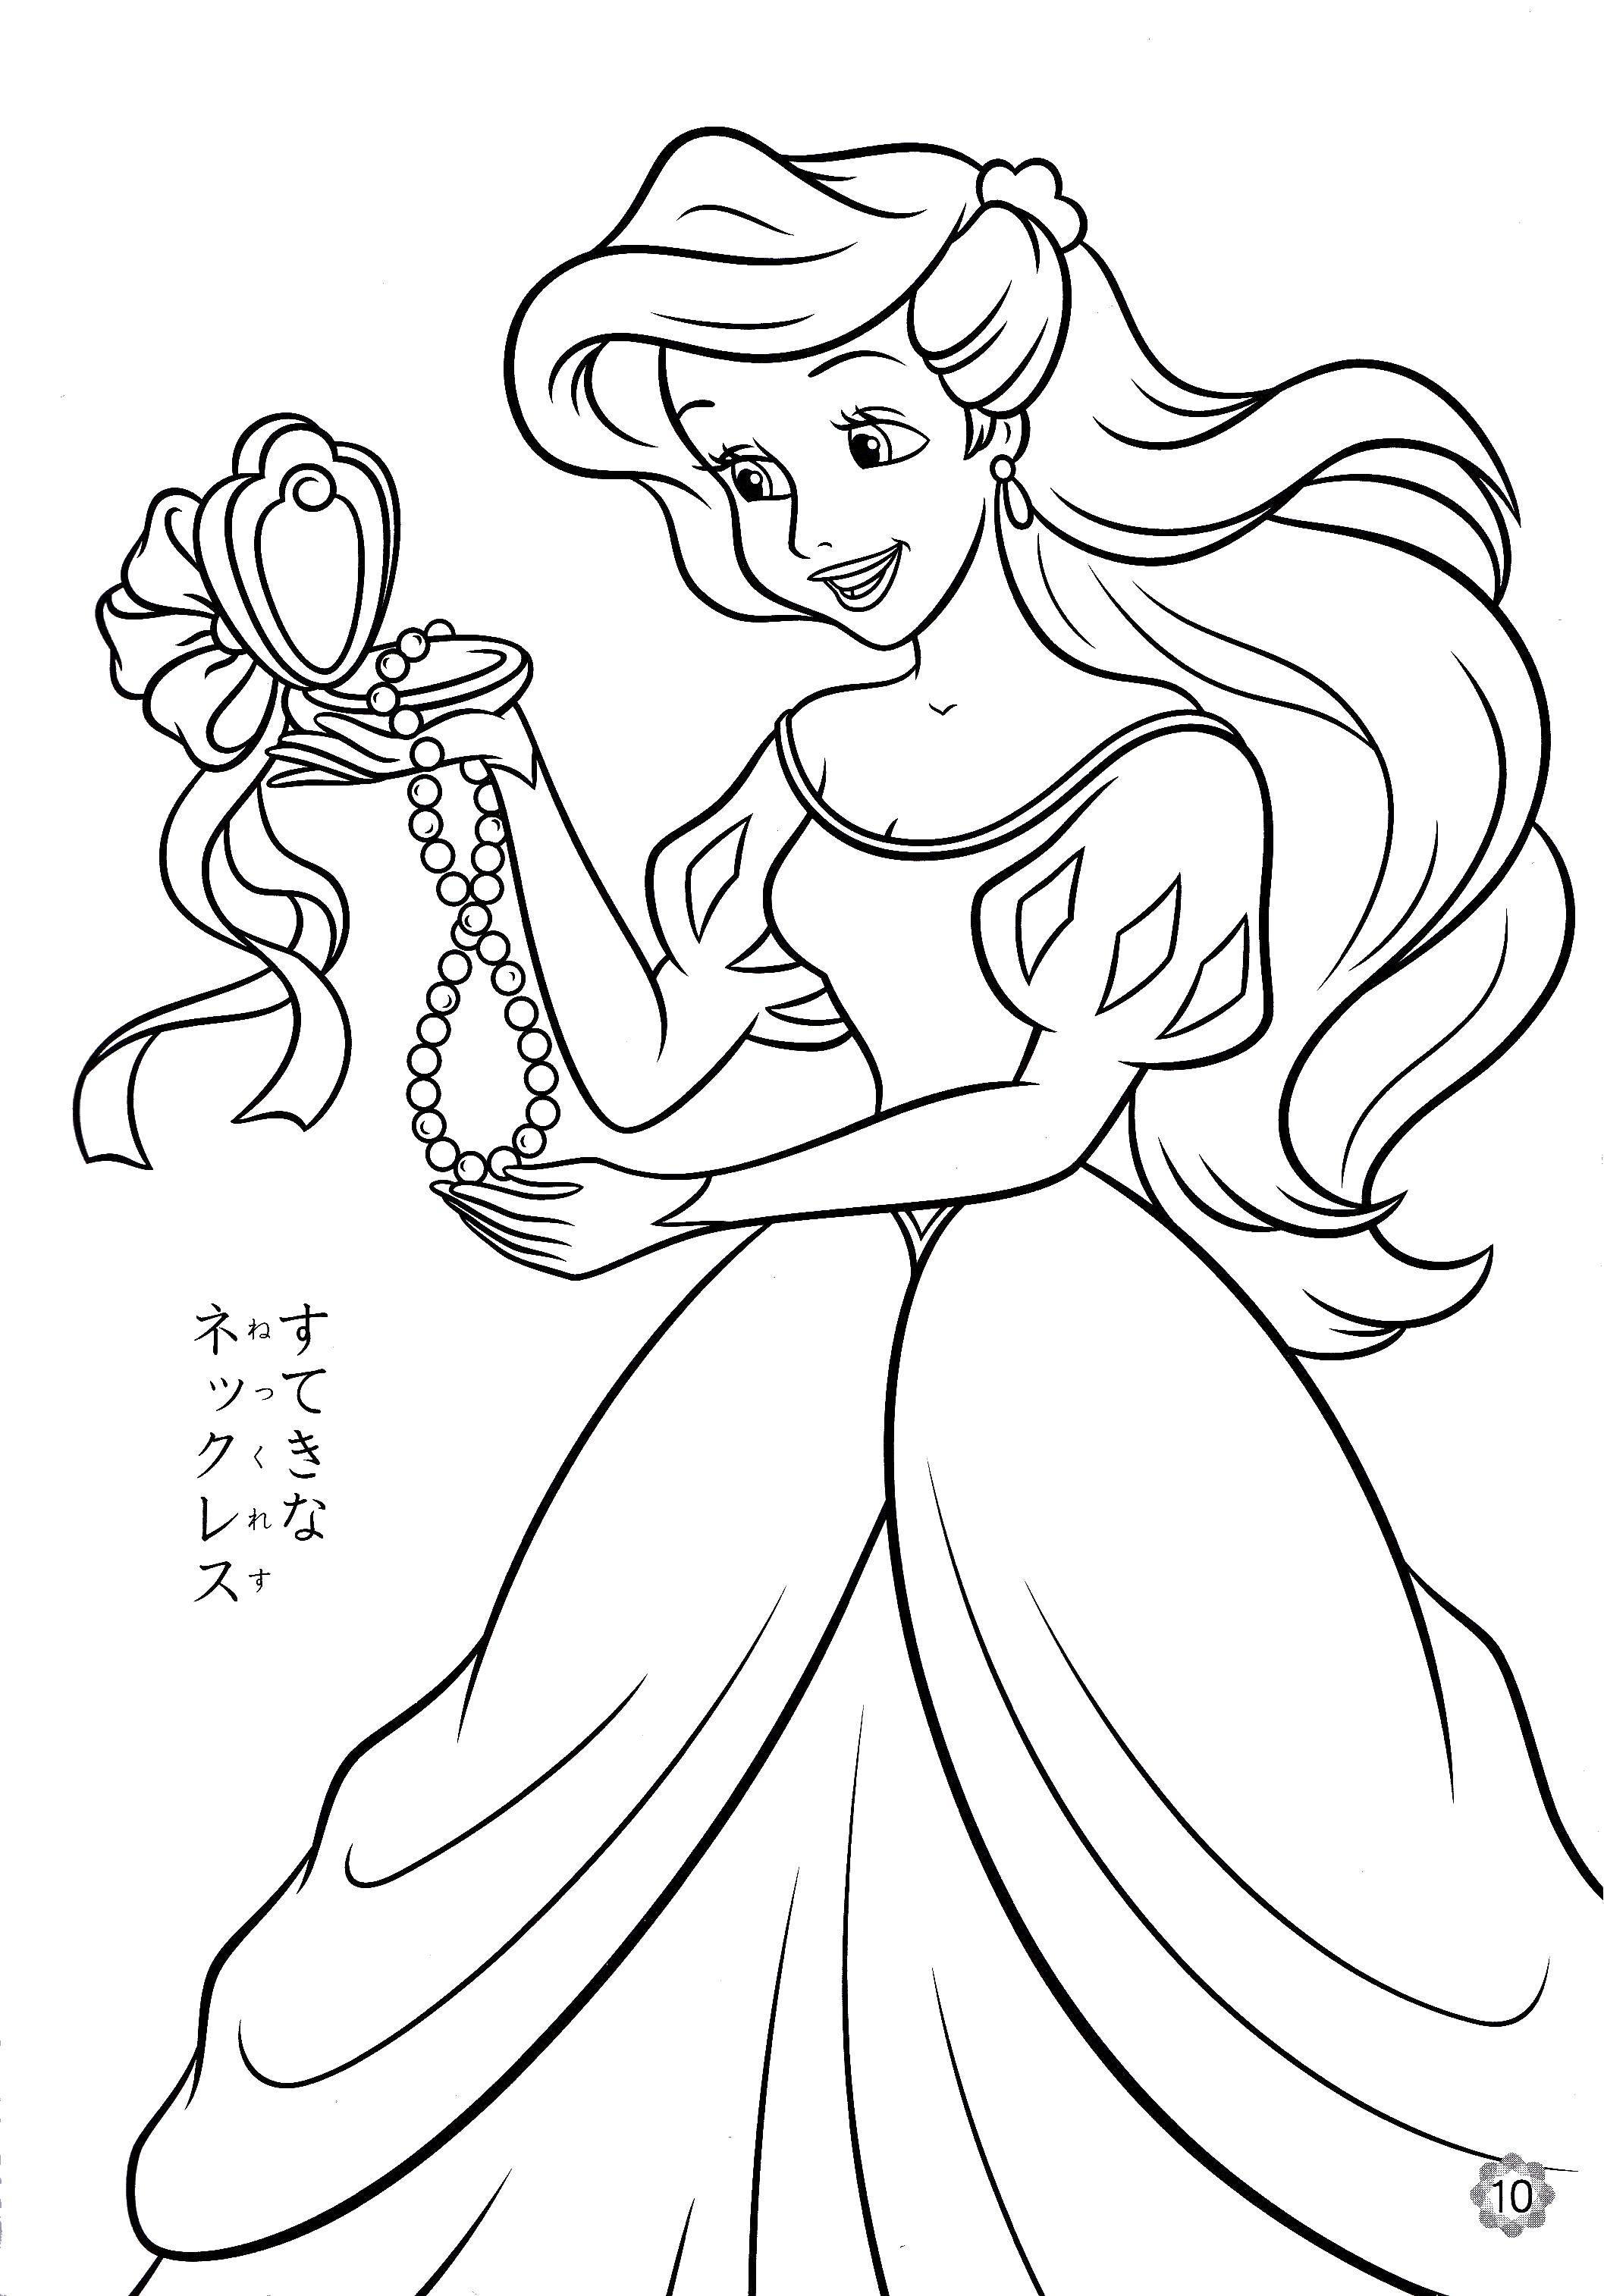 Coloring Ariel and pearls. Category Disney coloring pages. Tags:  Disney, the little mermaid, Ariel.